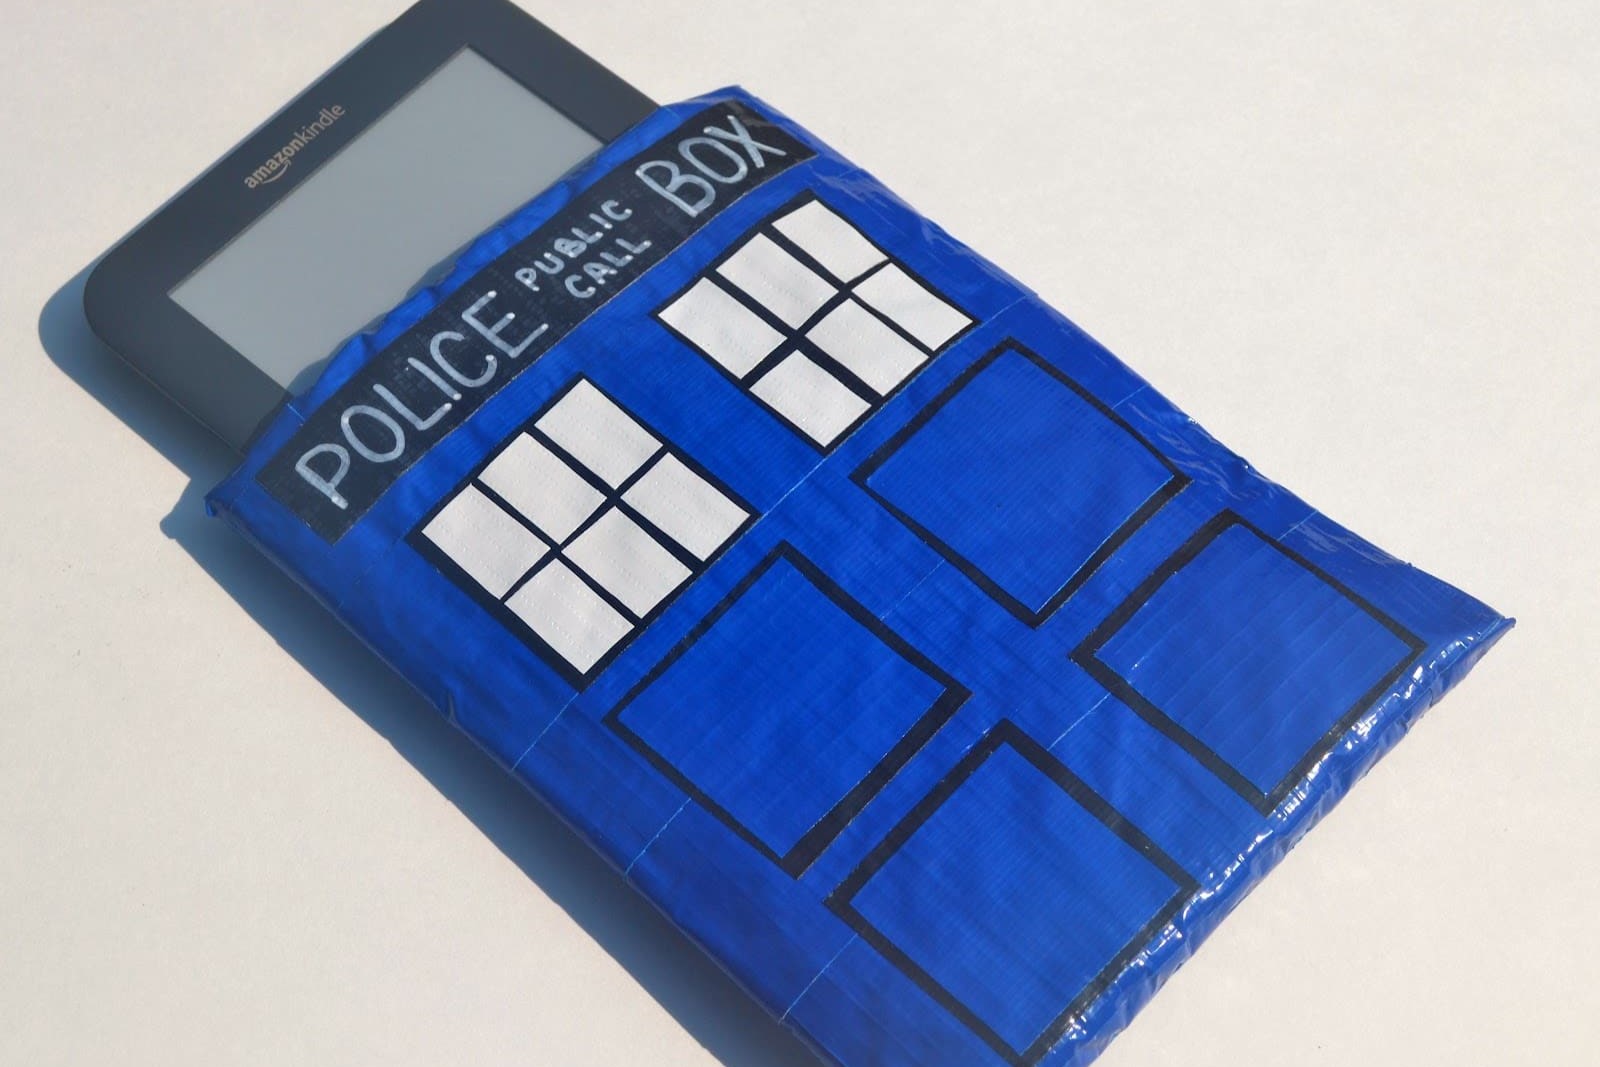 showcasing-your-fandom-with-a-tardis-phone-case